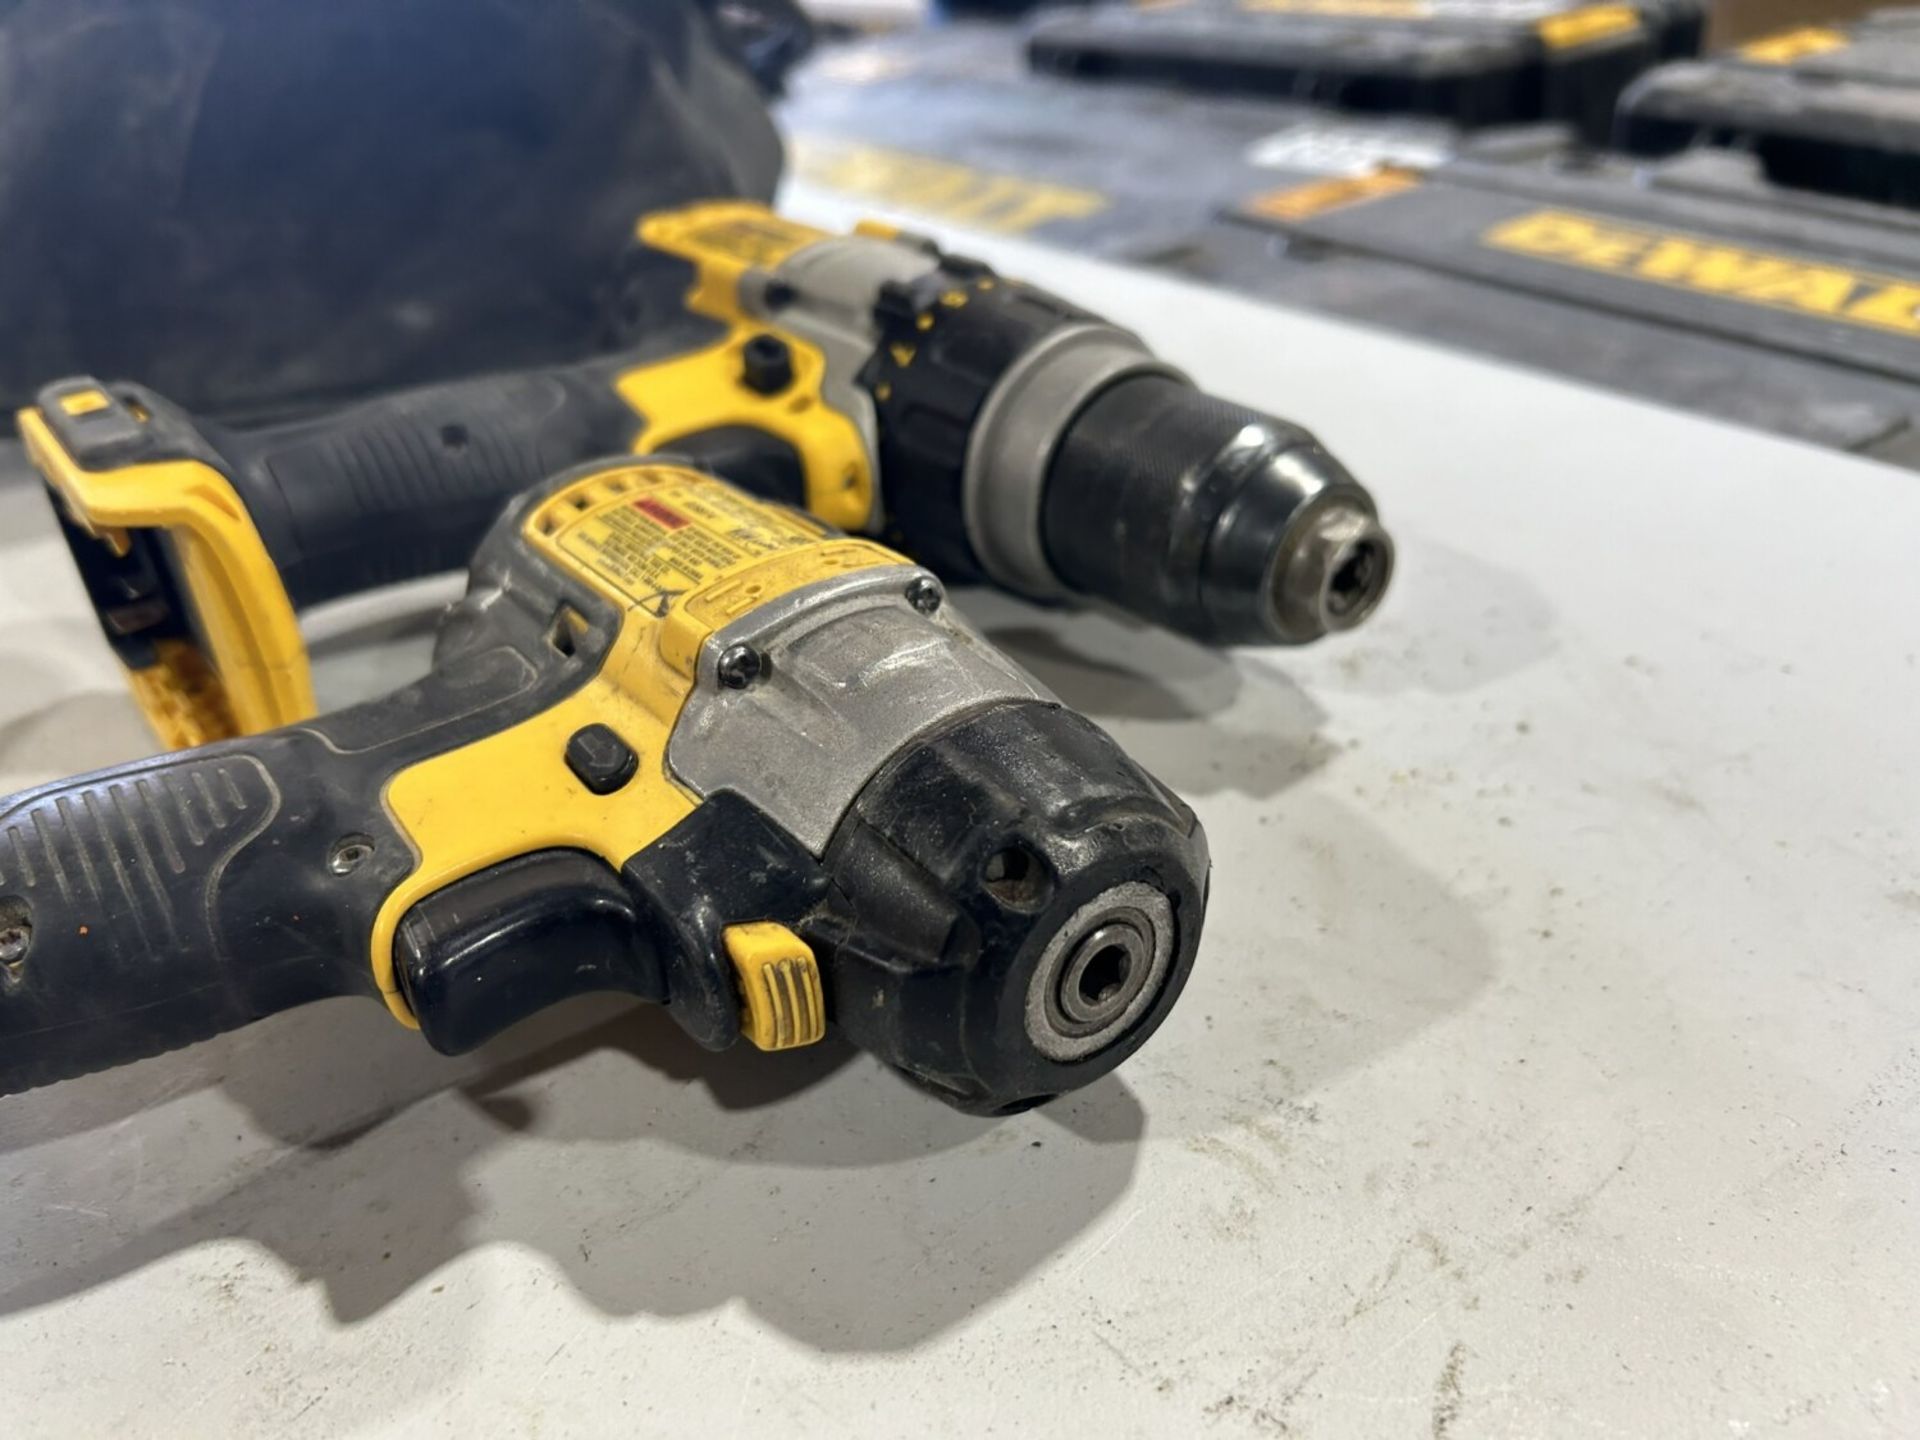 DEWALT CORDLESS 4.25" CIRCULAR SAW, IMPACT DRIVER, DRILL, & LIGHT W/ BATTERY AND CHARGER - Image 8 of 10